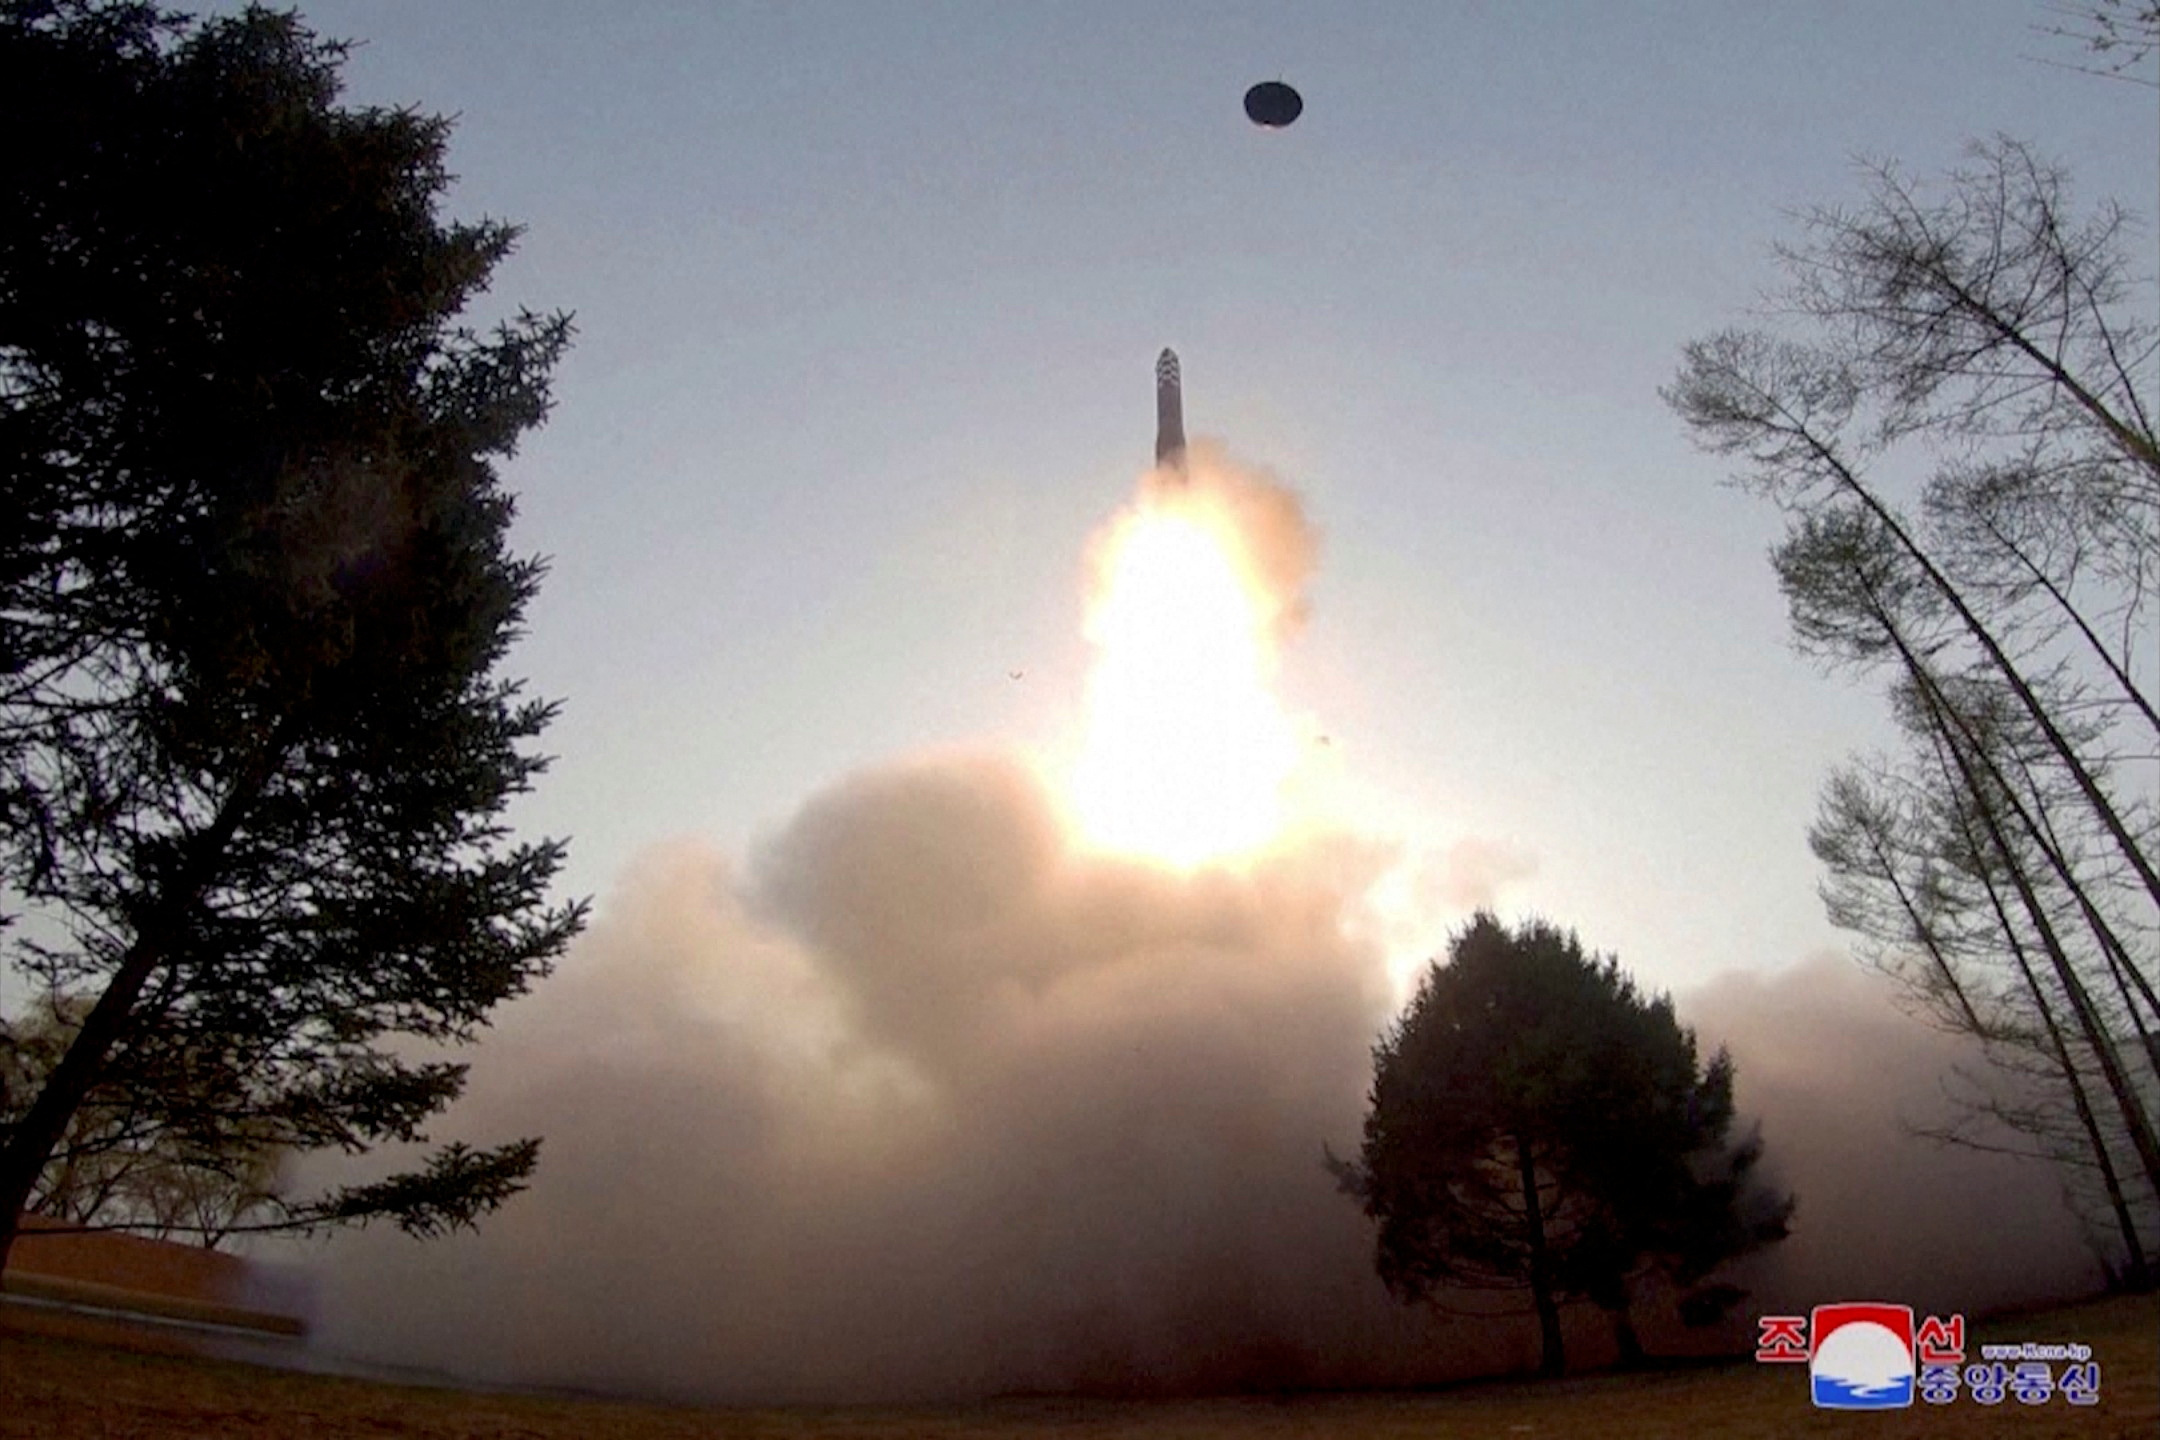 Test launch of a new solid-fuel intercontinental ballistic missile (ICBM) Hwasong-18